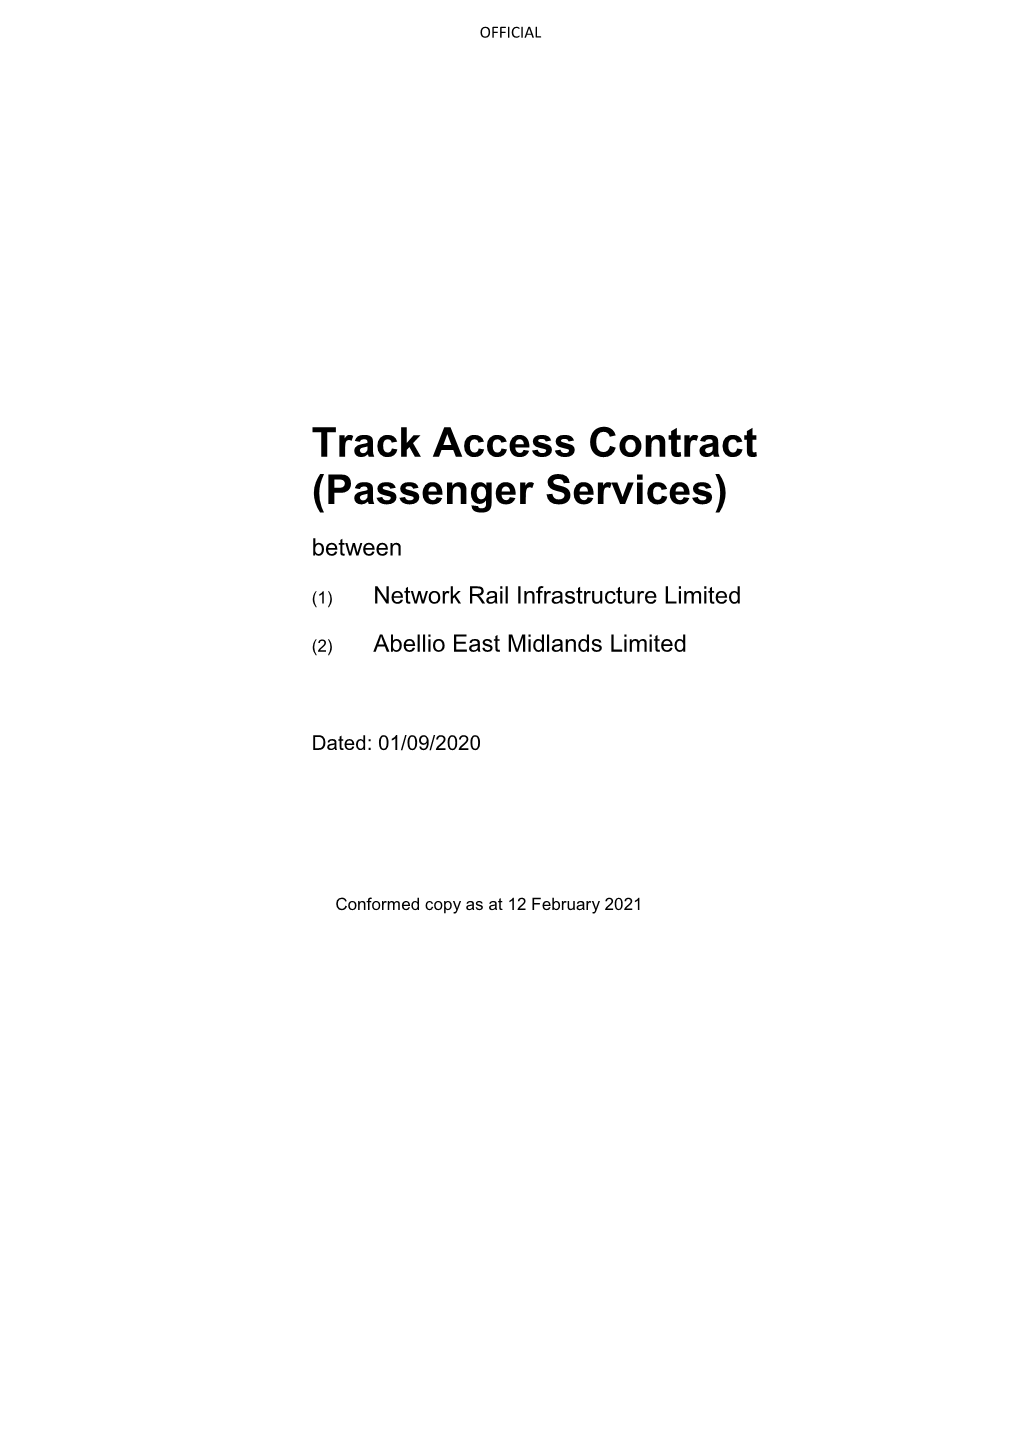 Track Access Contract (Passenger Services) Between